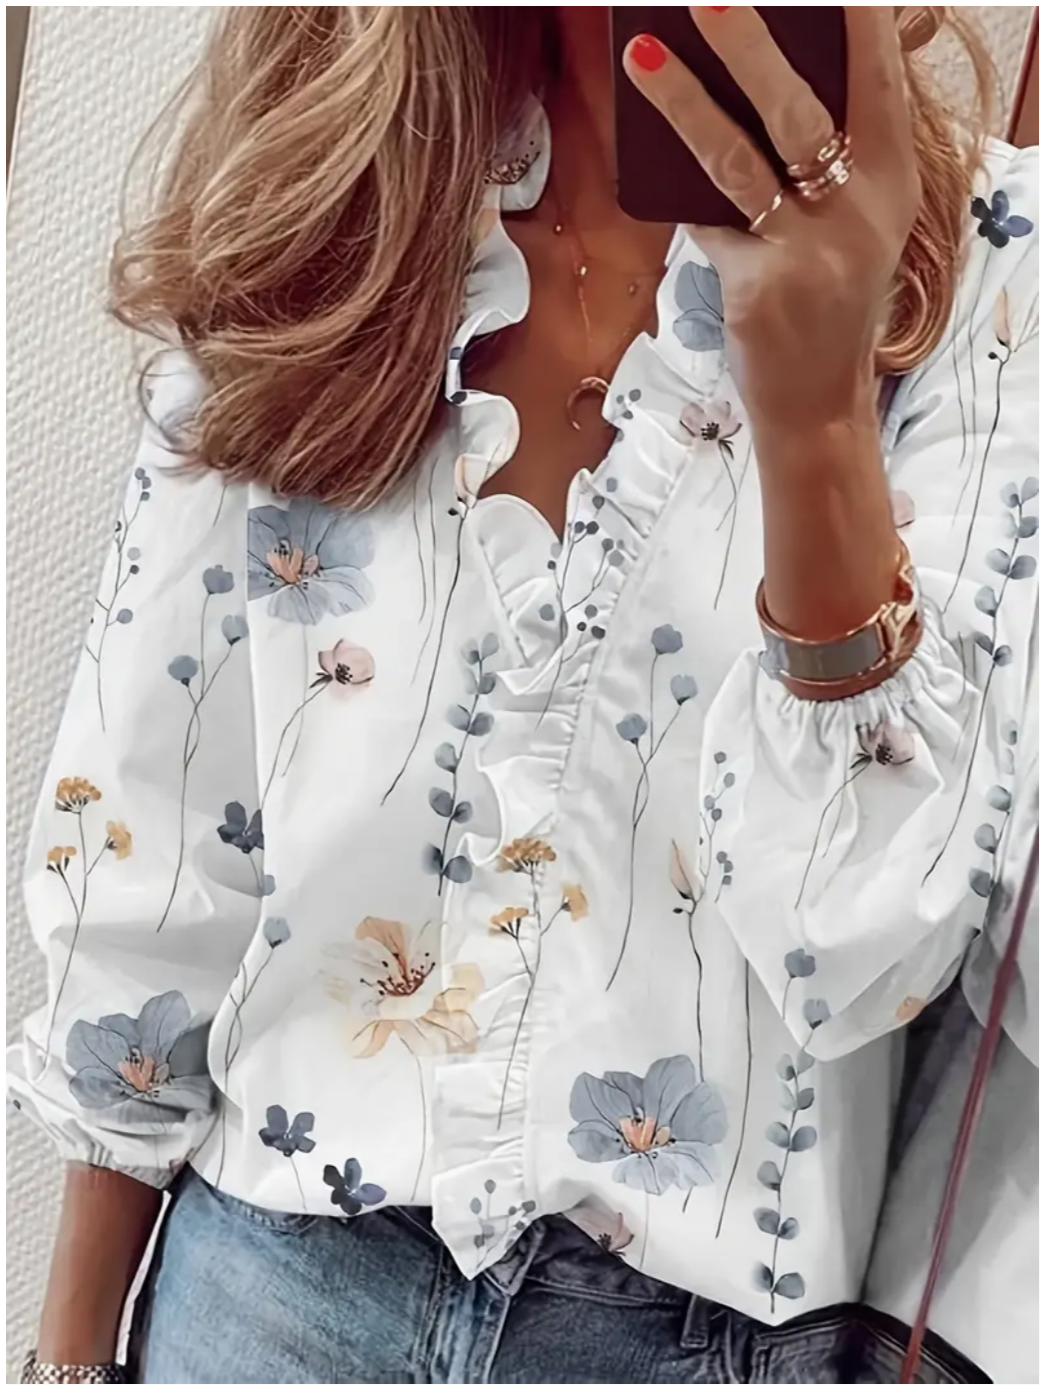 Blossoming Beauty: Plus Size Floral Print Blouse with Lantern Sleeves, Ruffle Trim, and V-Neck Elegance - Your Perfect Casual Chic Statement!